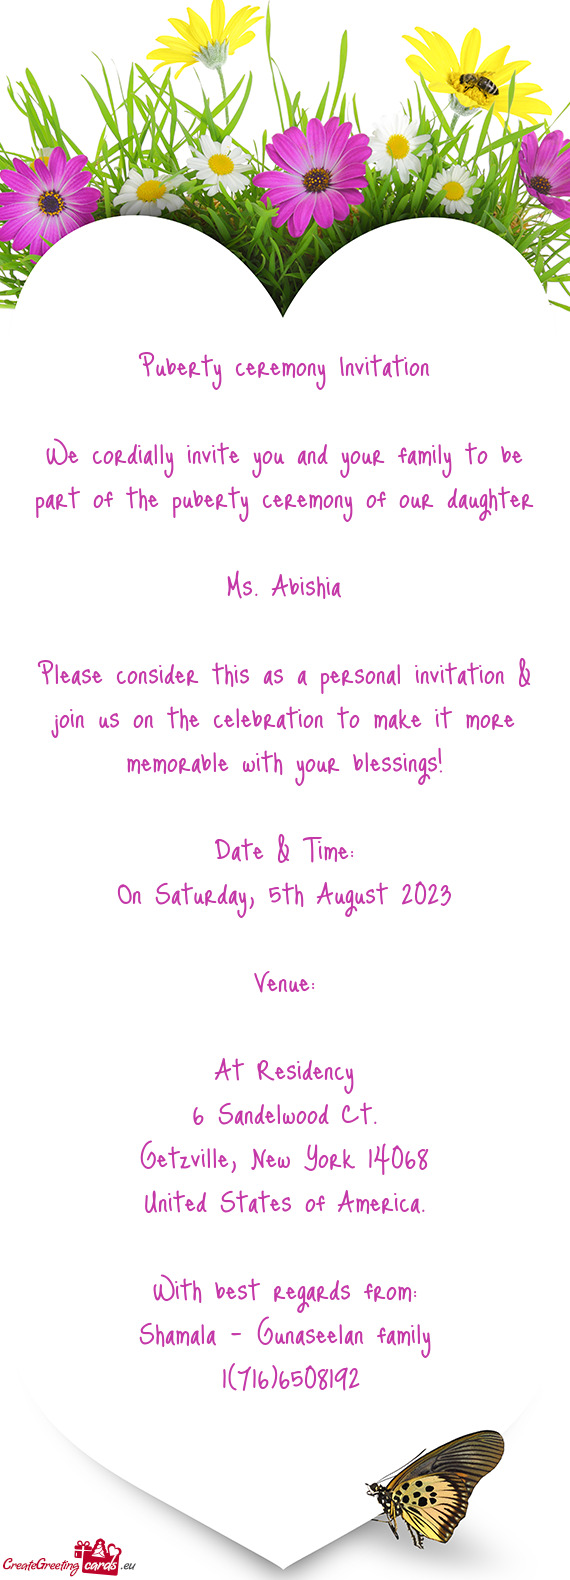 Please consider this as a personal invitation & join us on the celebration to make it more memorable